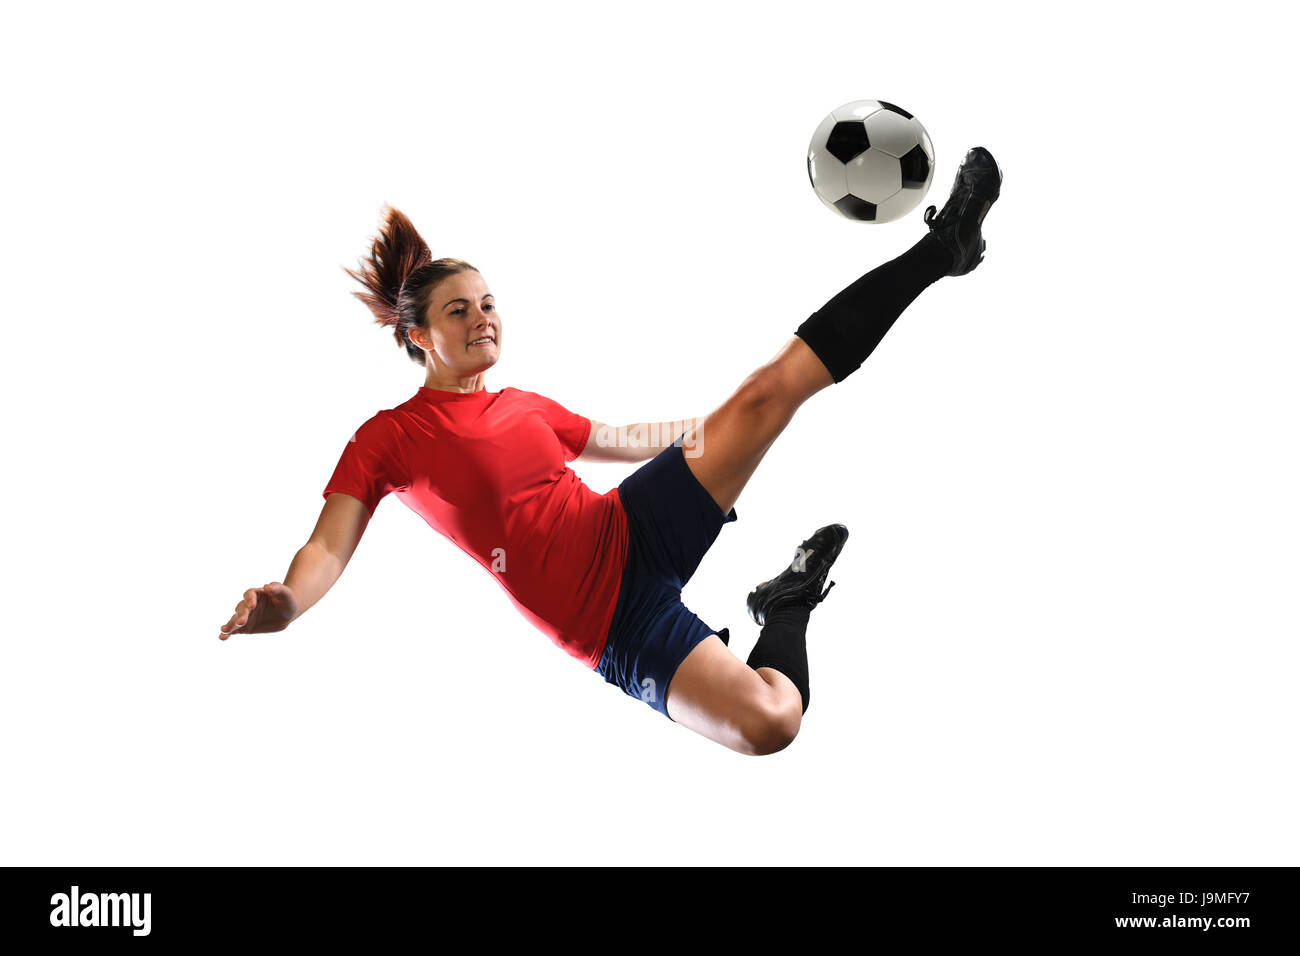 Female soccer player kicking ball isolated over white background Stock Photo